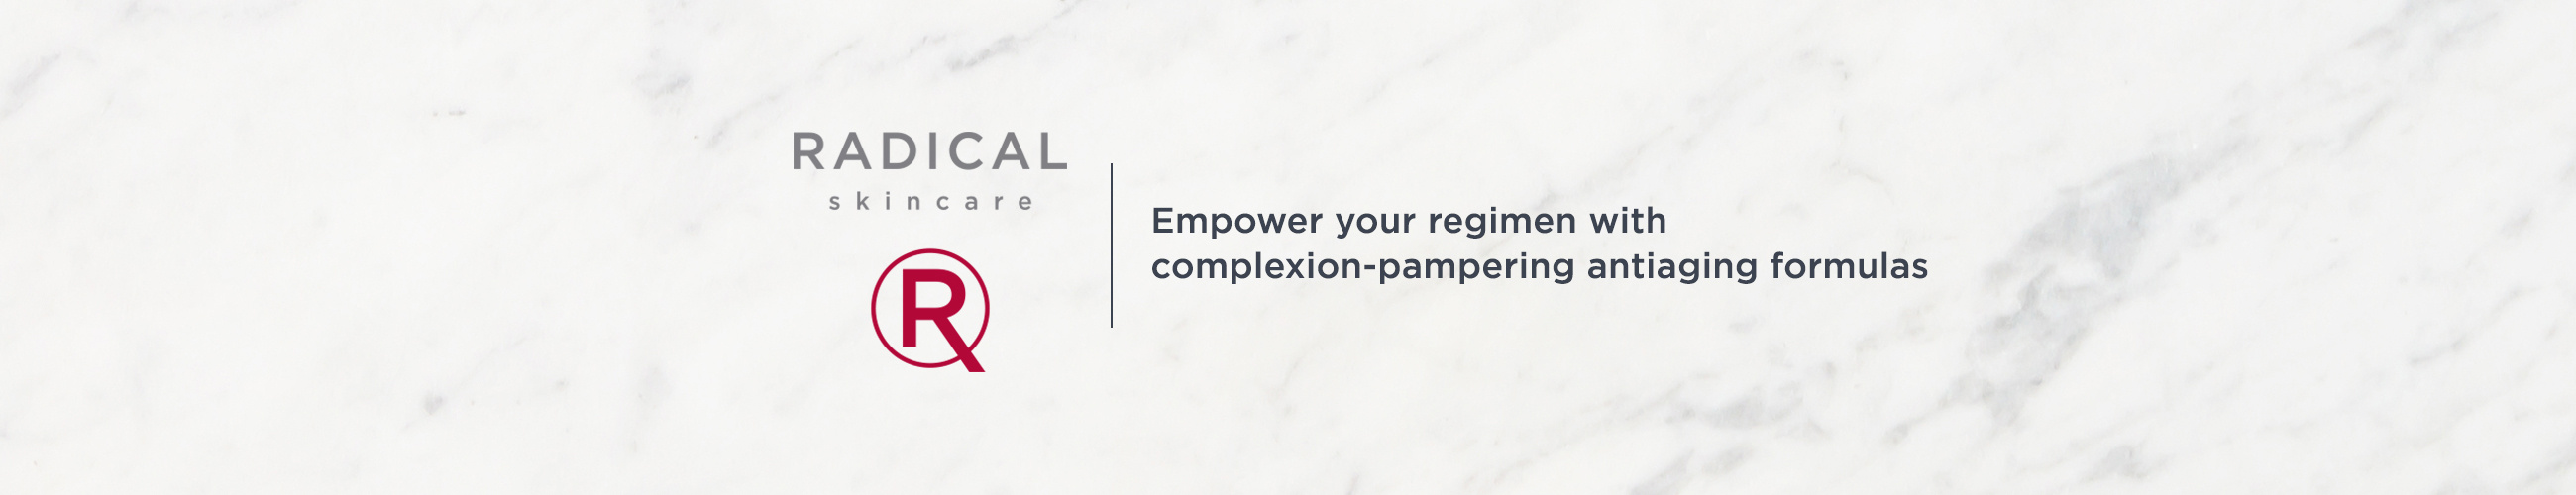 Radical Skincare Empower your regimen with complexion-pampering antiaging formulas